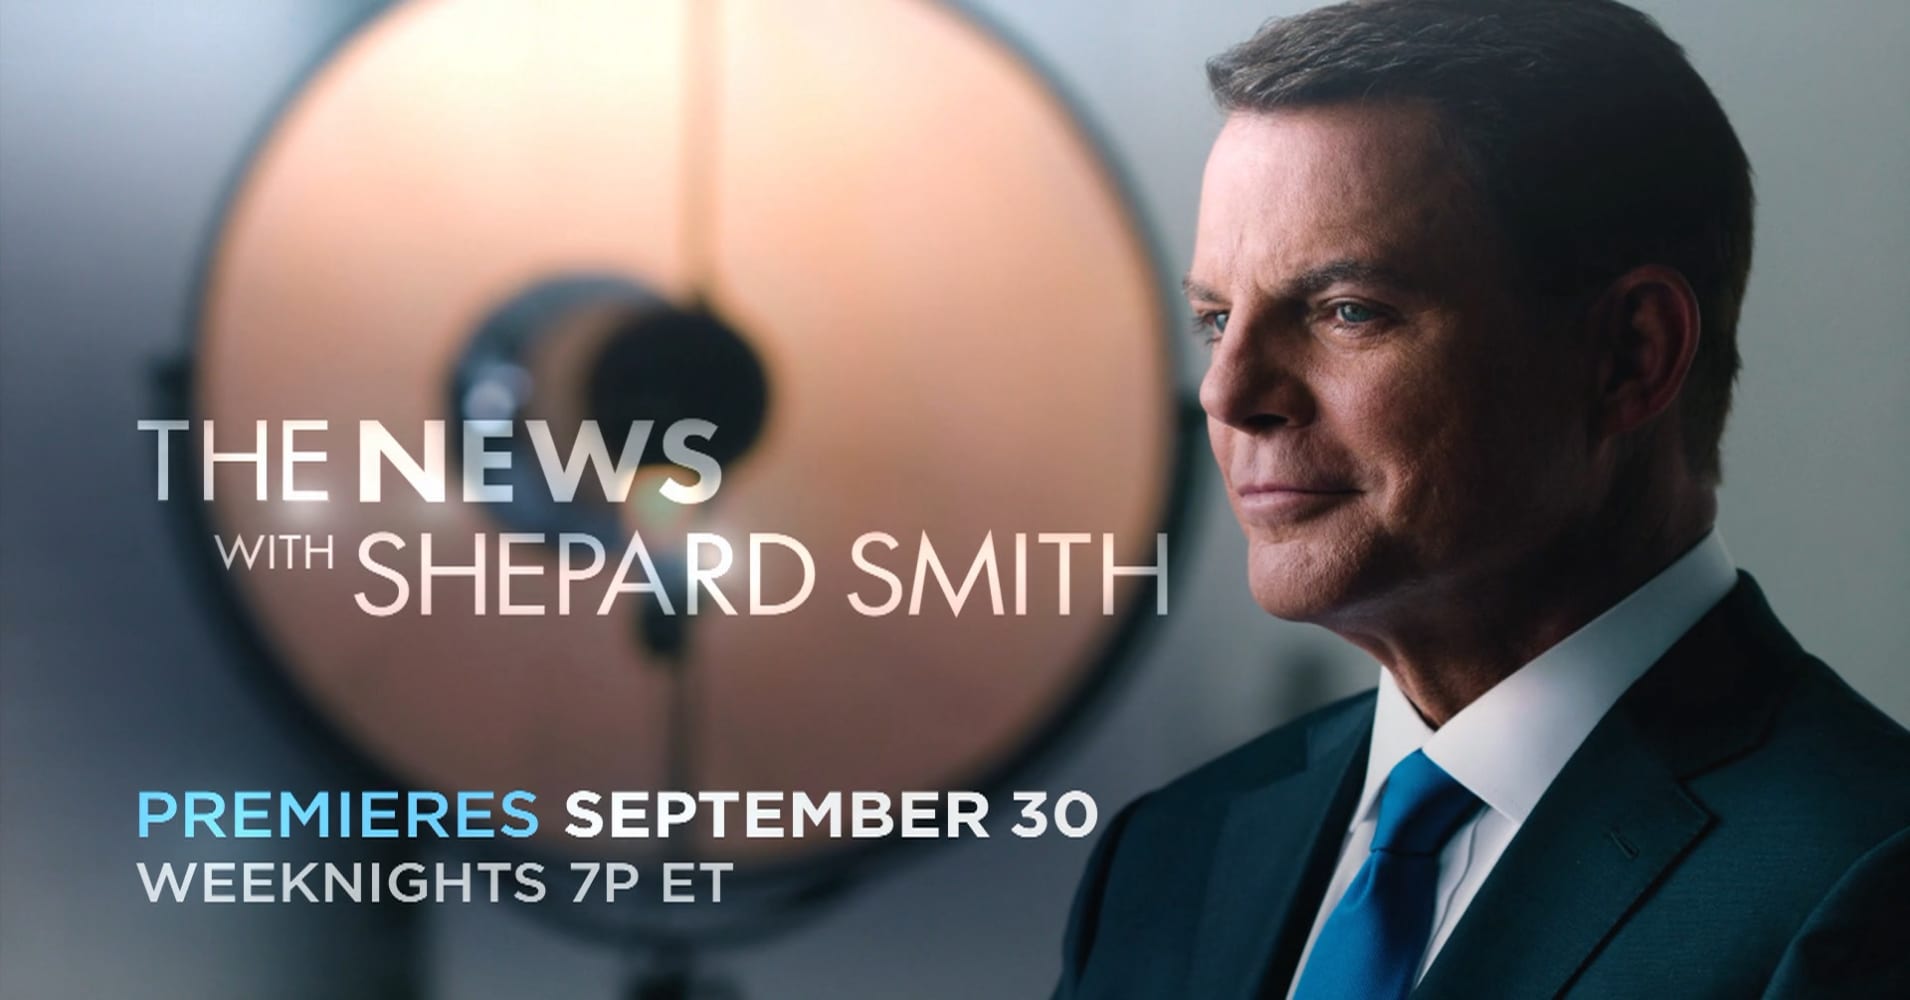 CNBC's 'The News with Shepard Smith' to premiere on Sept. 30 at 7 .